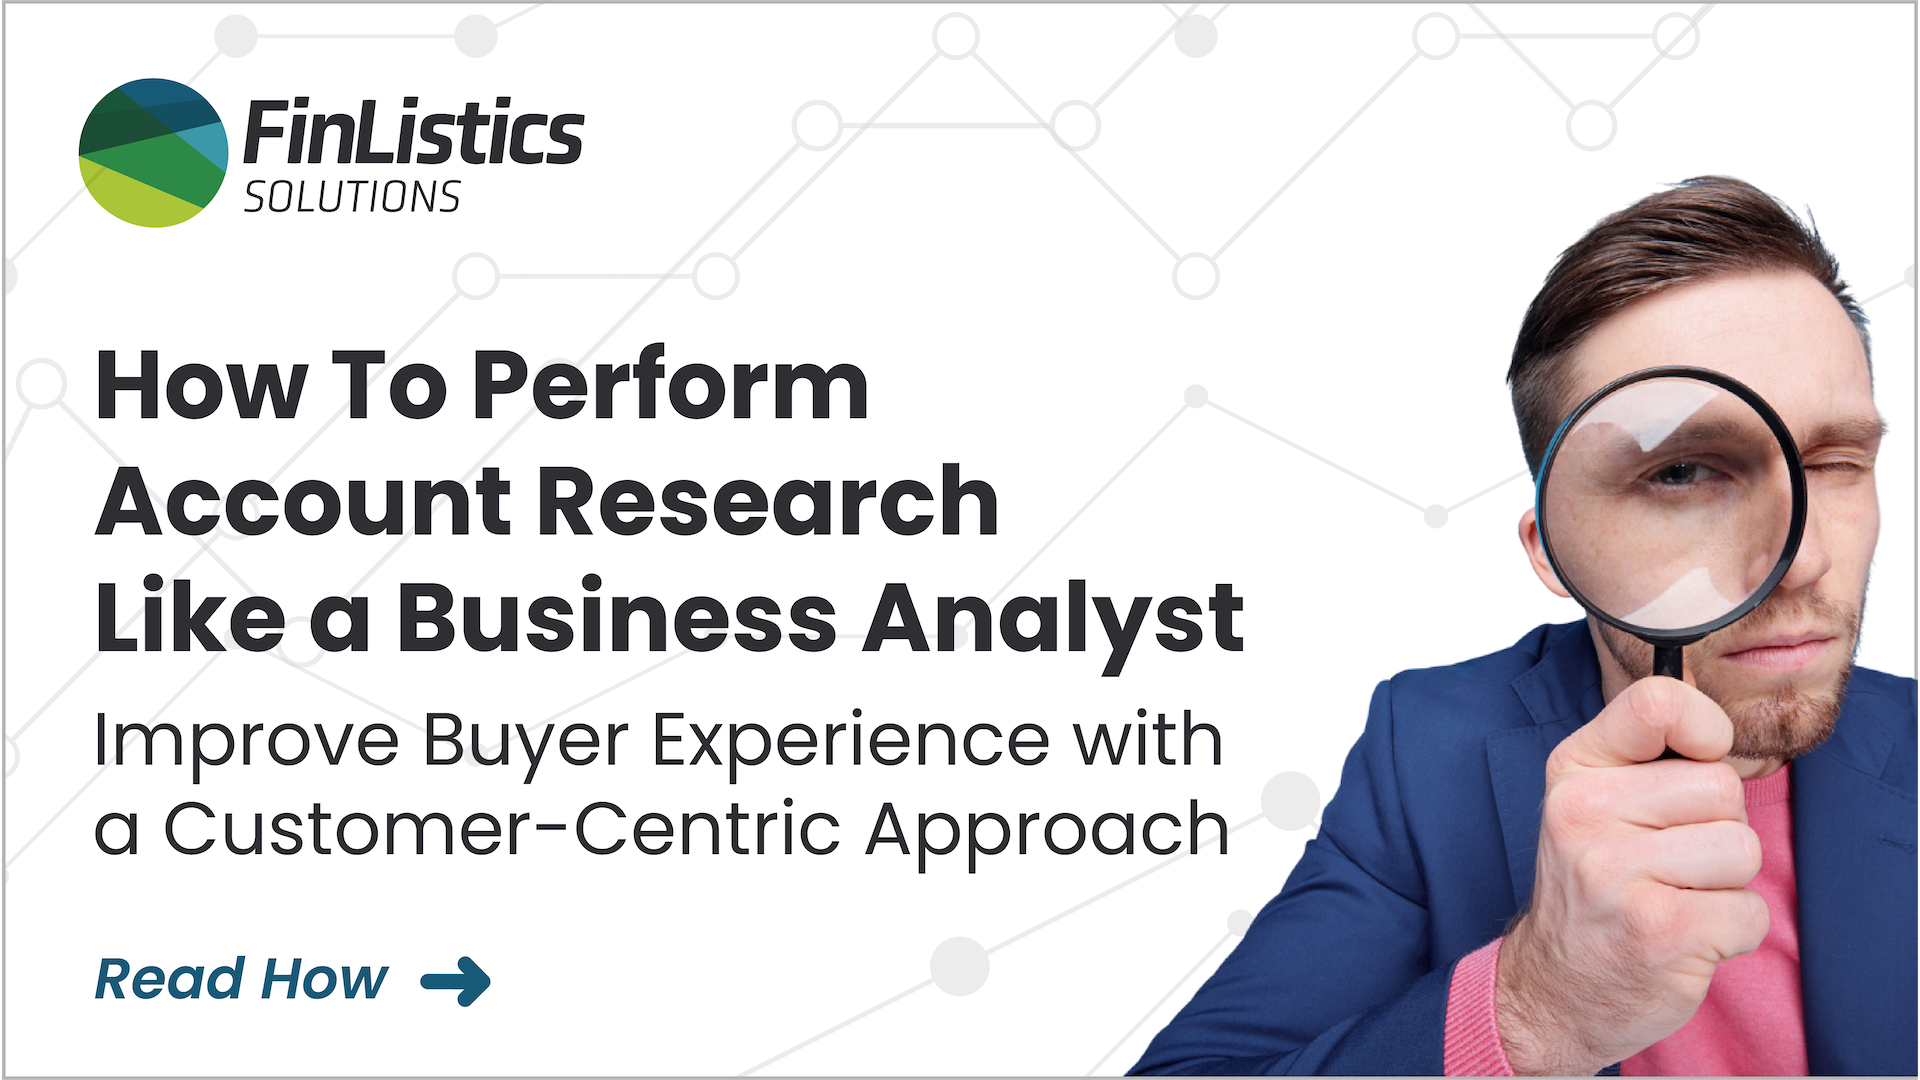 How to Perform Account Research like a Business Analyst | Drive Buyer Experience with a Customer-Centric Approach